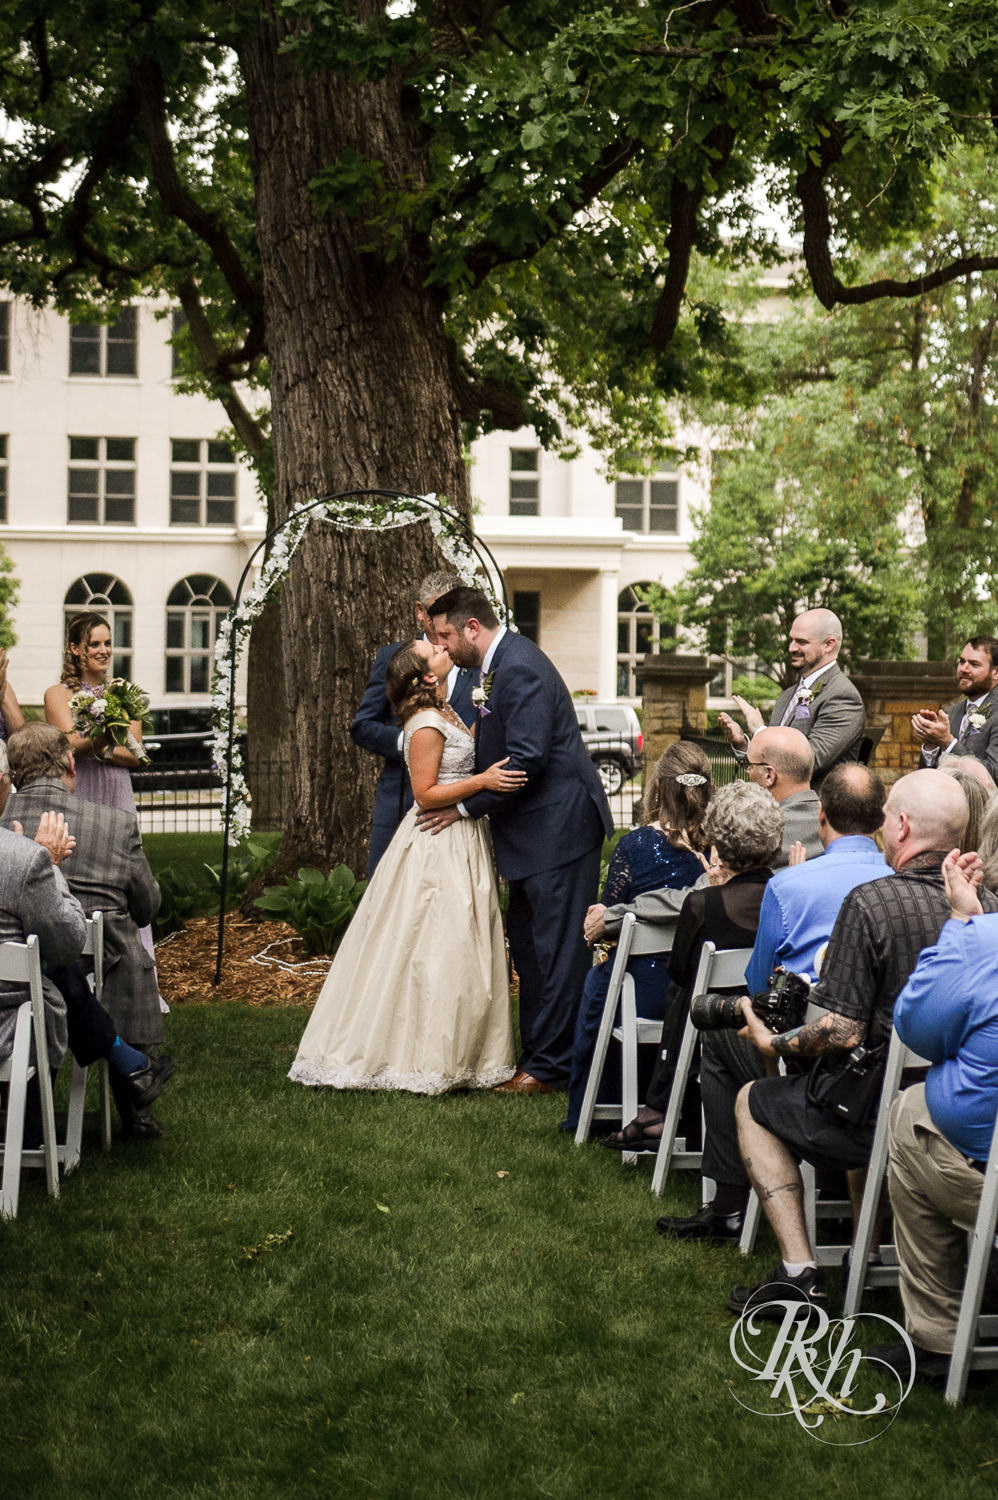 Bride and groom kiss during wedding ceremony at Summit Manor Reception House in Saint Paul, Minnesota.